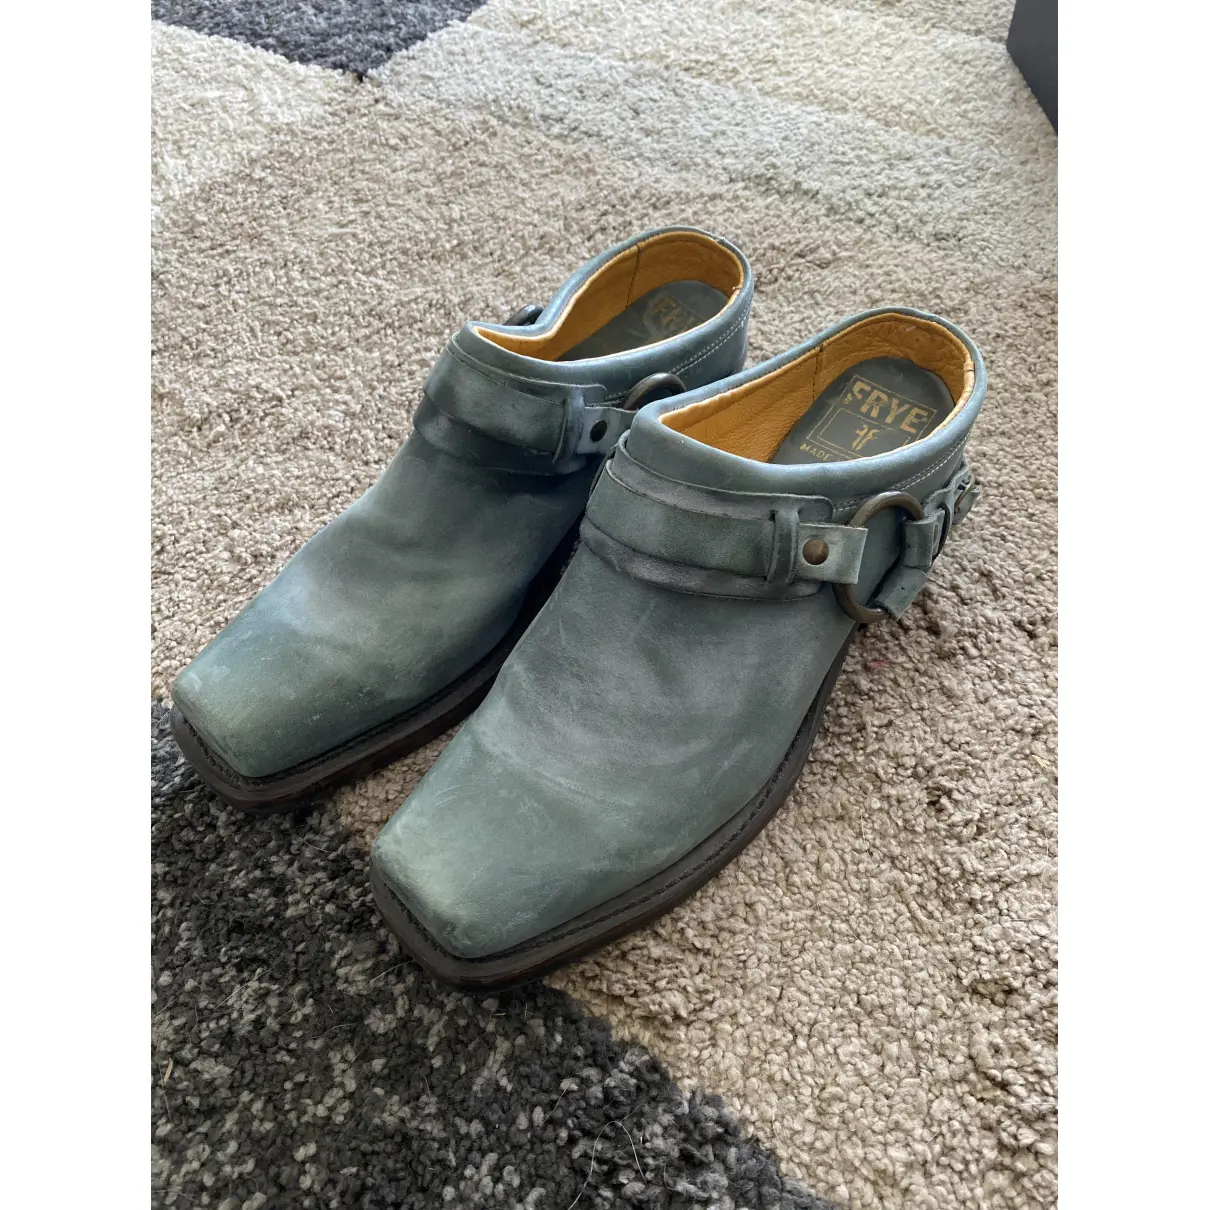 Buy Frye Leather mules & clogs online